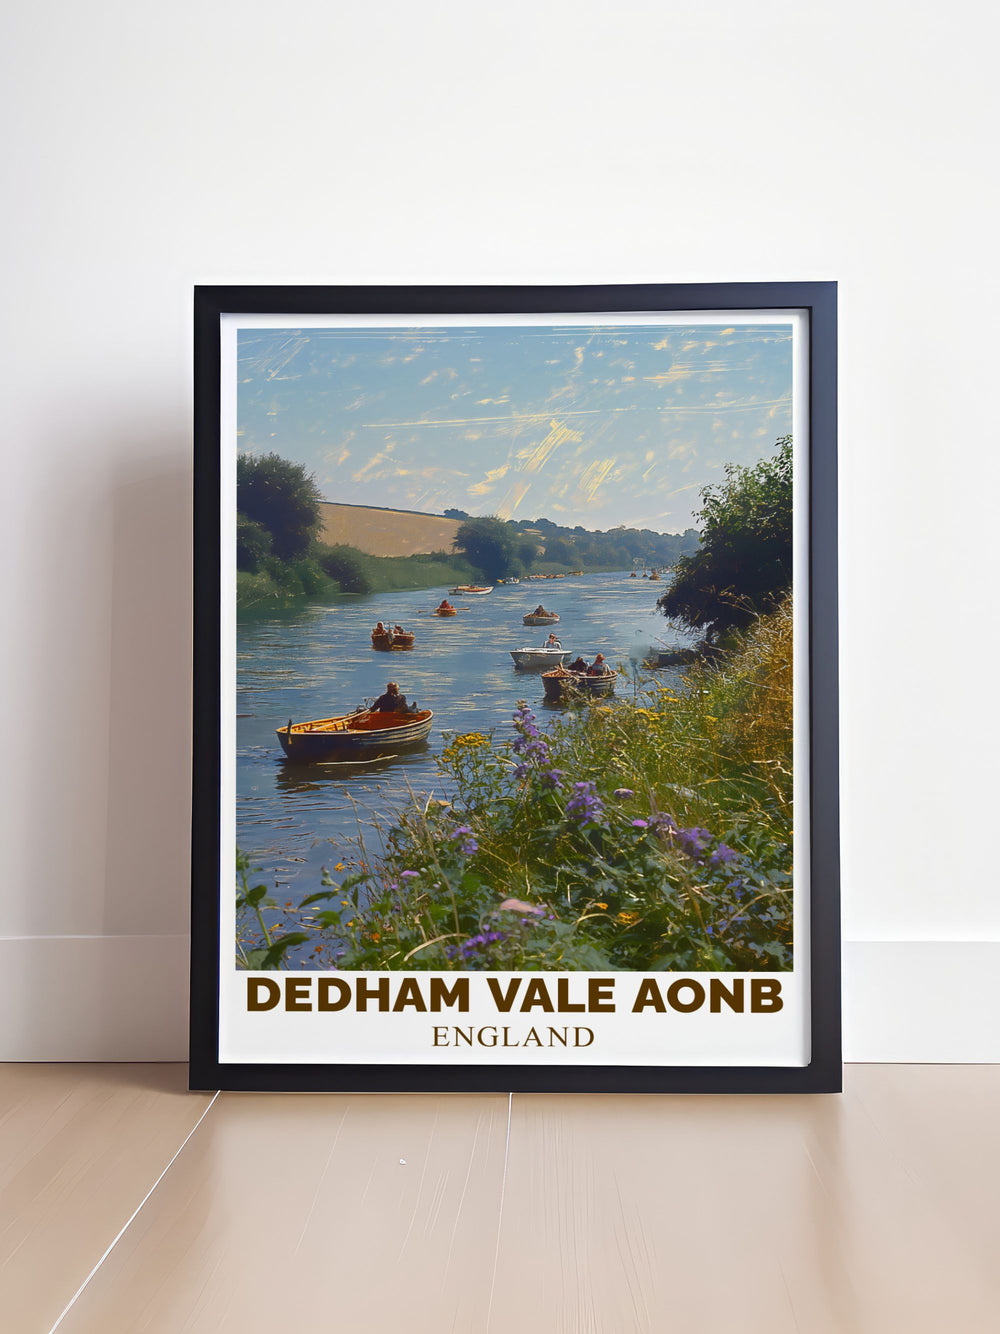 Gallery wall art illustrating the timeless beauty of Dedham Vale, with its rolling hills and historic buildings, perfect for enhancing any room with the charm of the English countryside.